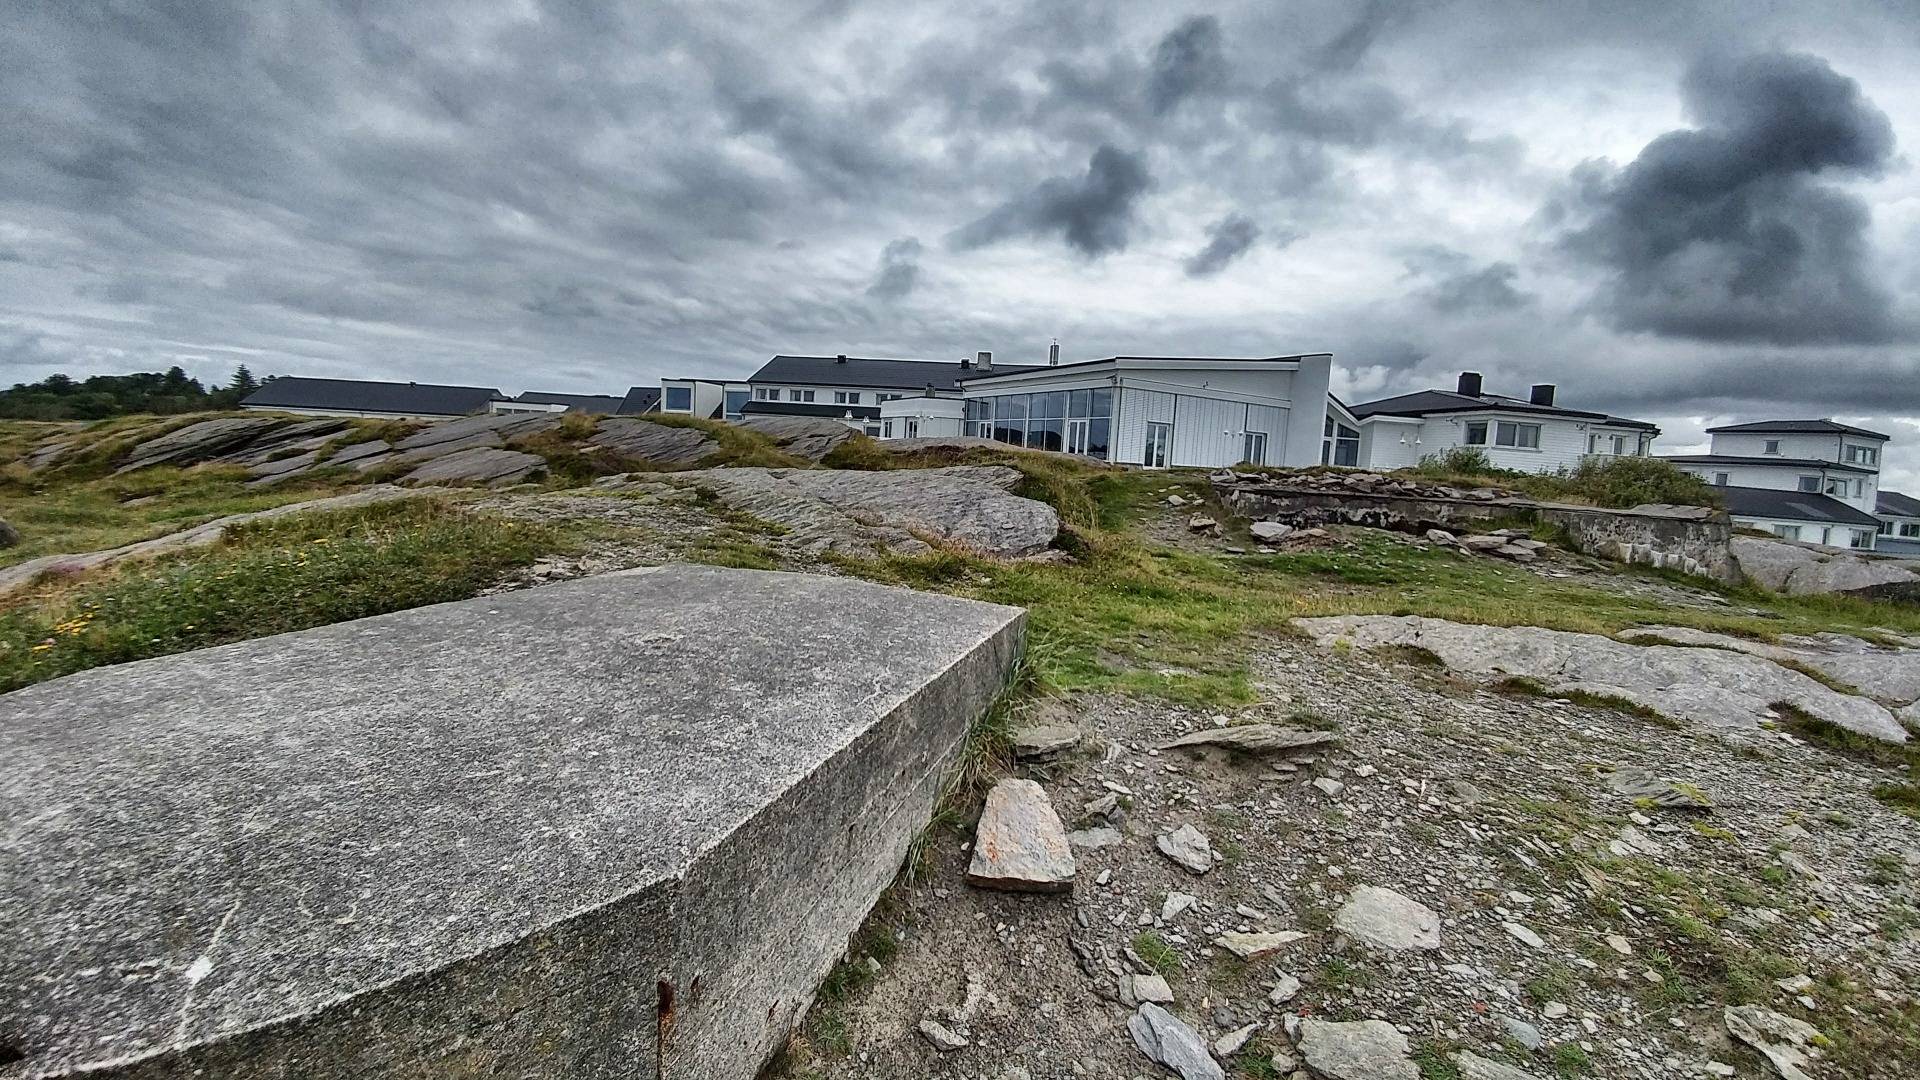 Behind a landscape full of bunkers are new build holiday homes